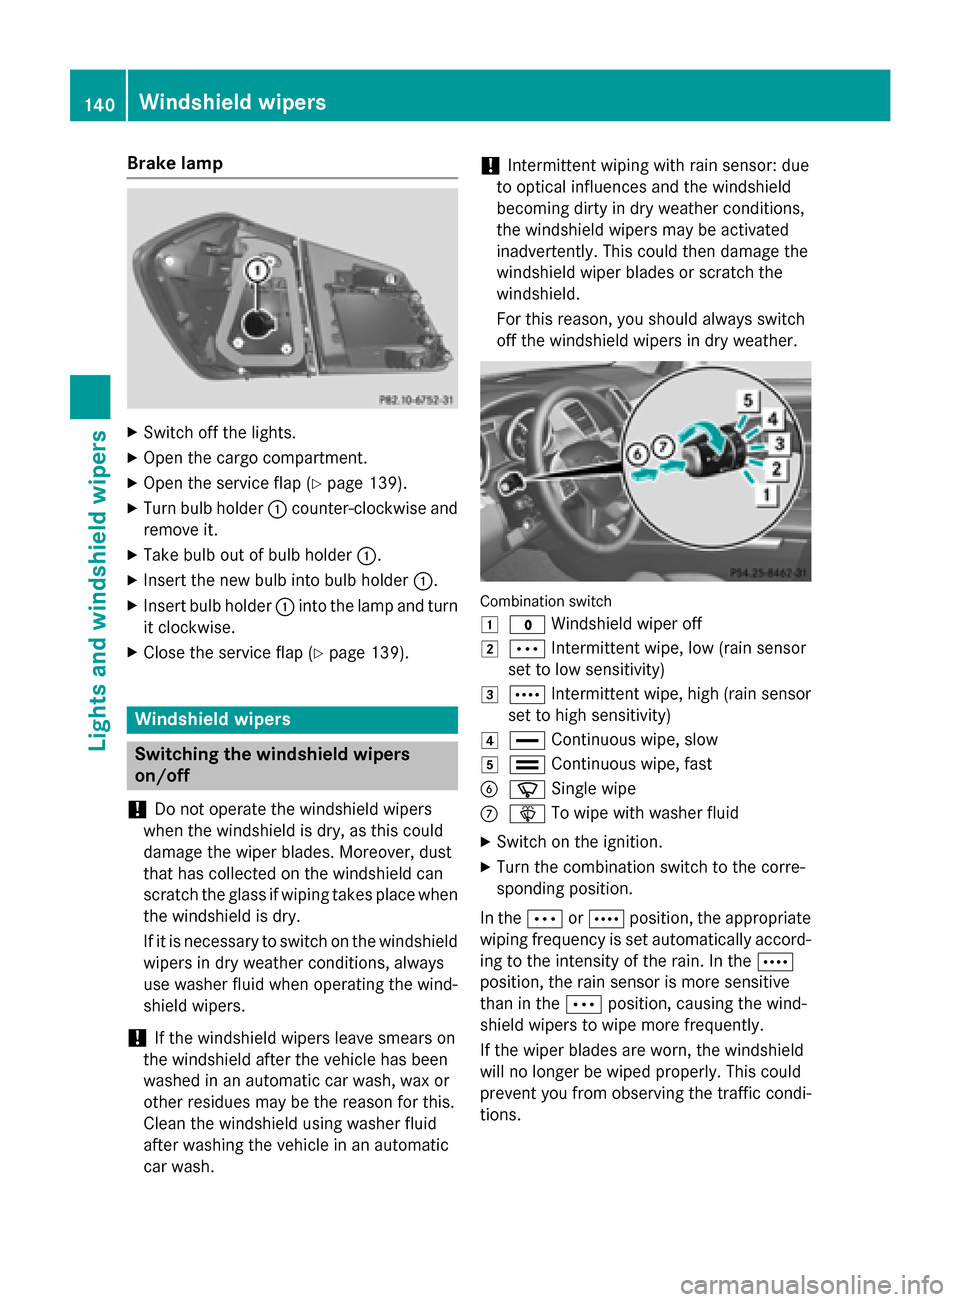 MERCEDES-BENZ GL-Class 2015 X166 Owners Manual Brake lamp
X
Switch off the lights.
X Open the cargo compartment.
X Open the service flap (Y page 139).
X Turn bulb holder 0043counter-clockwise and
remove it.
X Take bulb out of bulb holder 0043.
X I